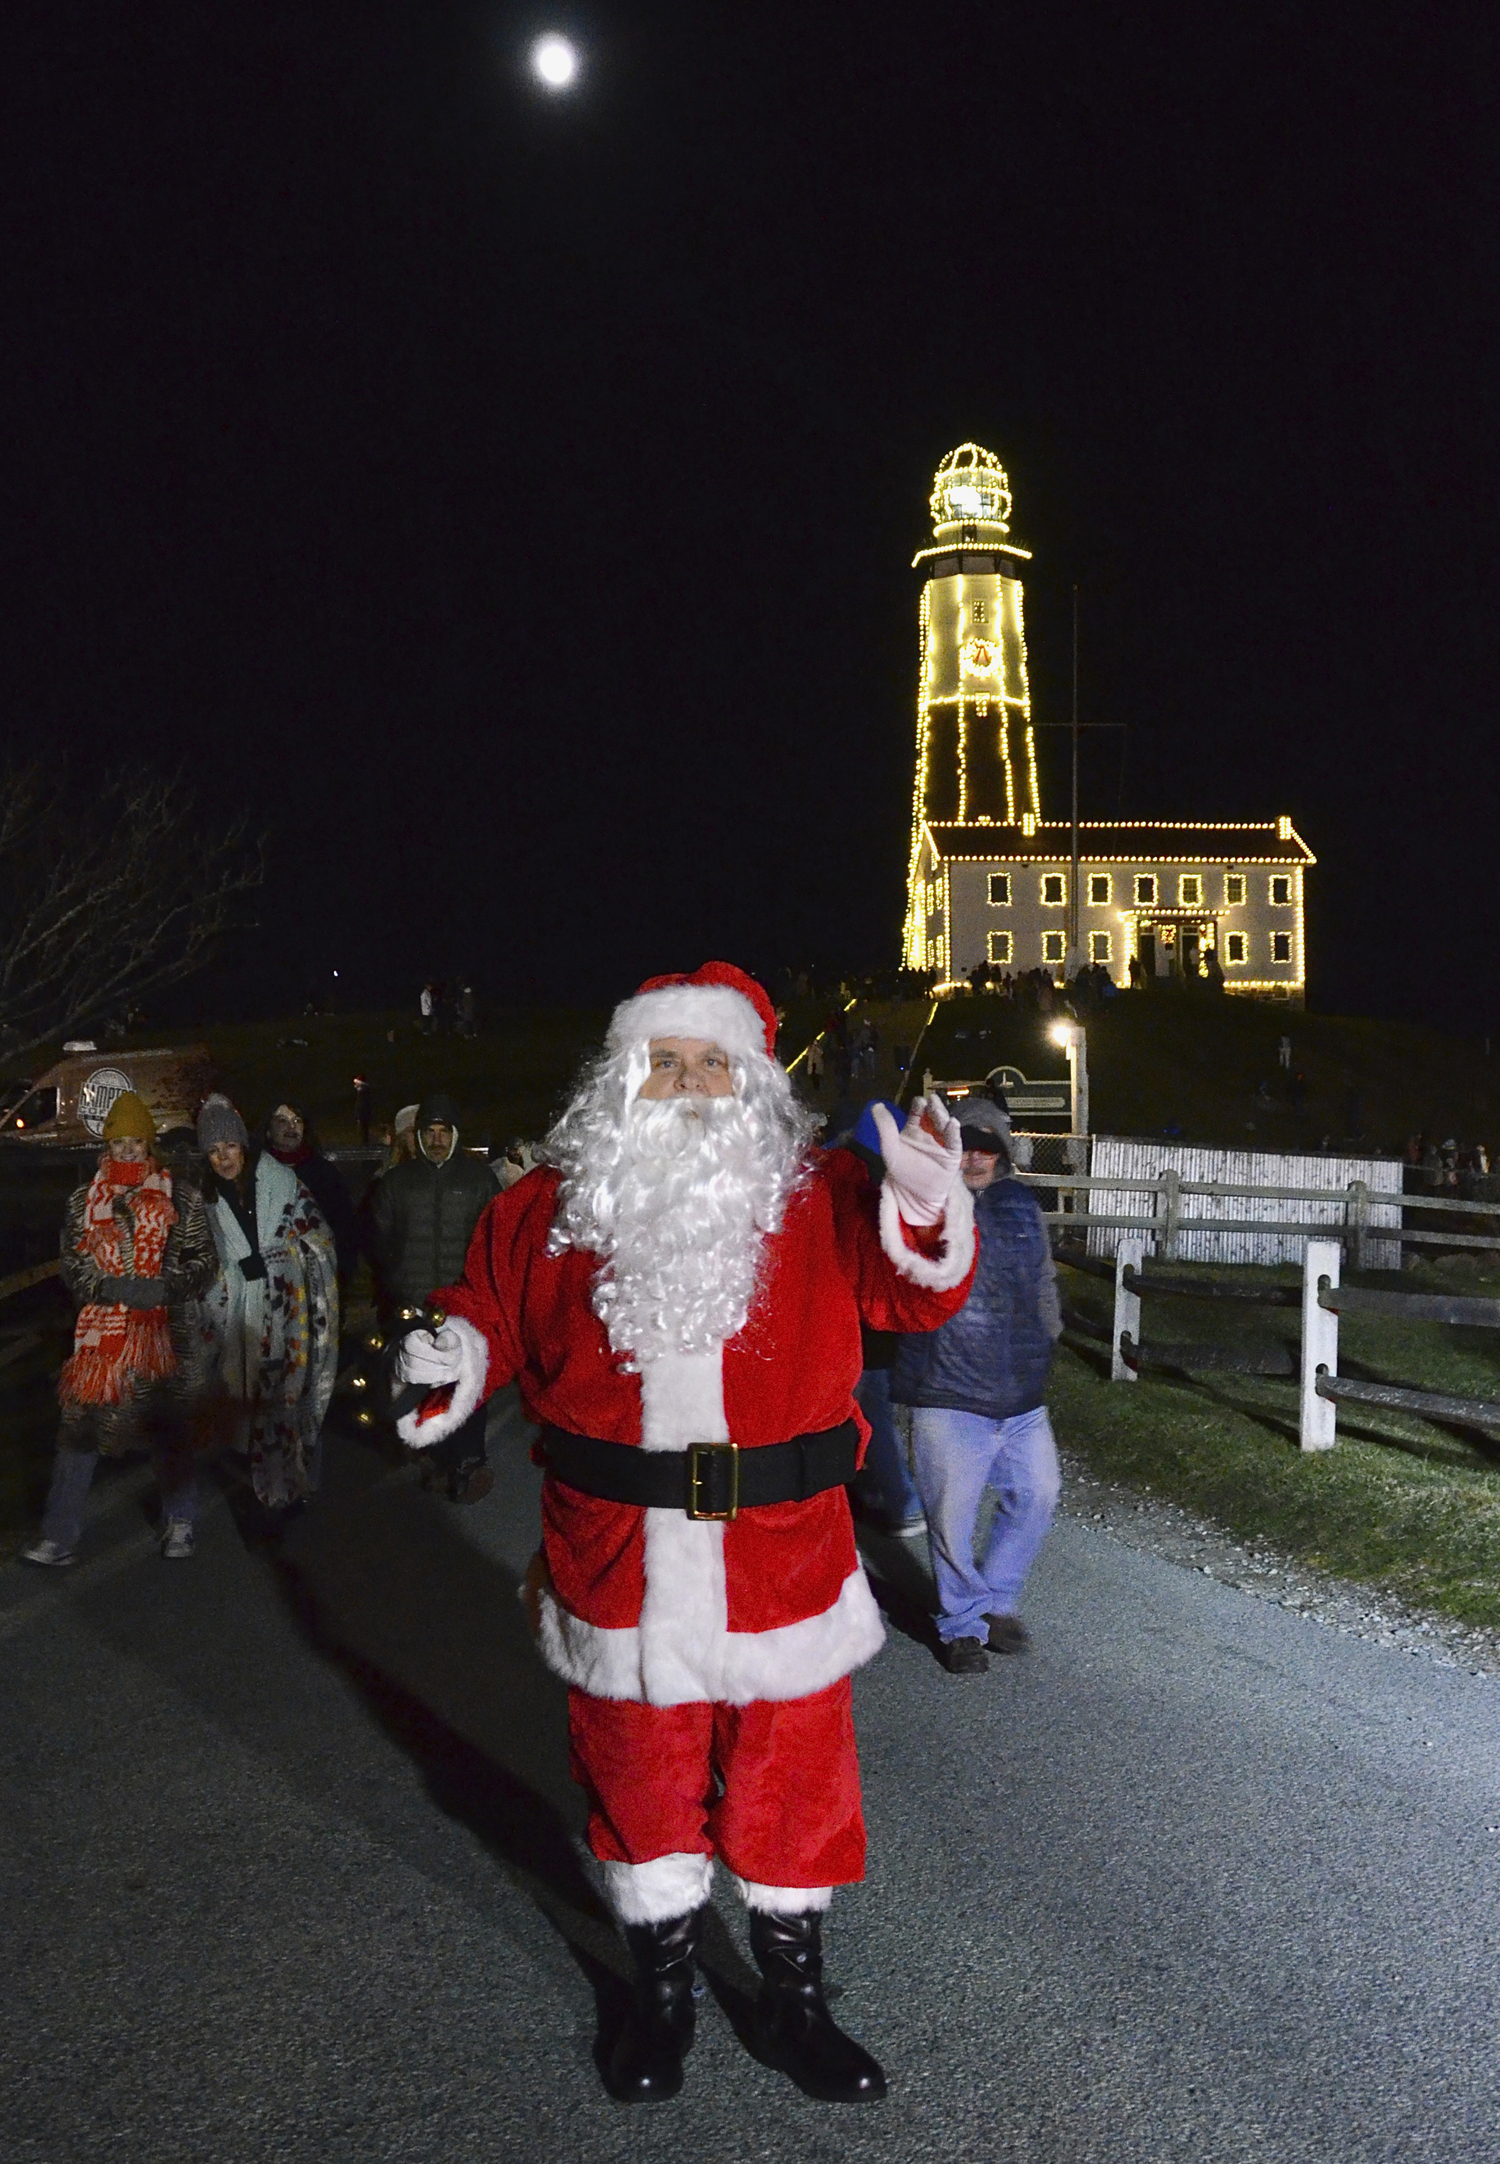 Santa was on hand for the lighting of the Montauk Lighthouse on Saturday evening.